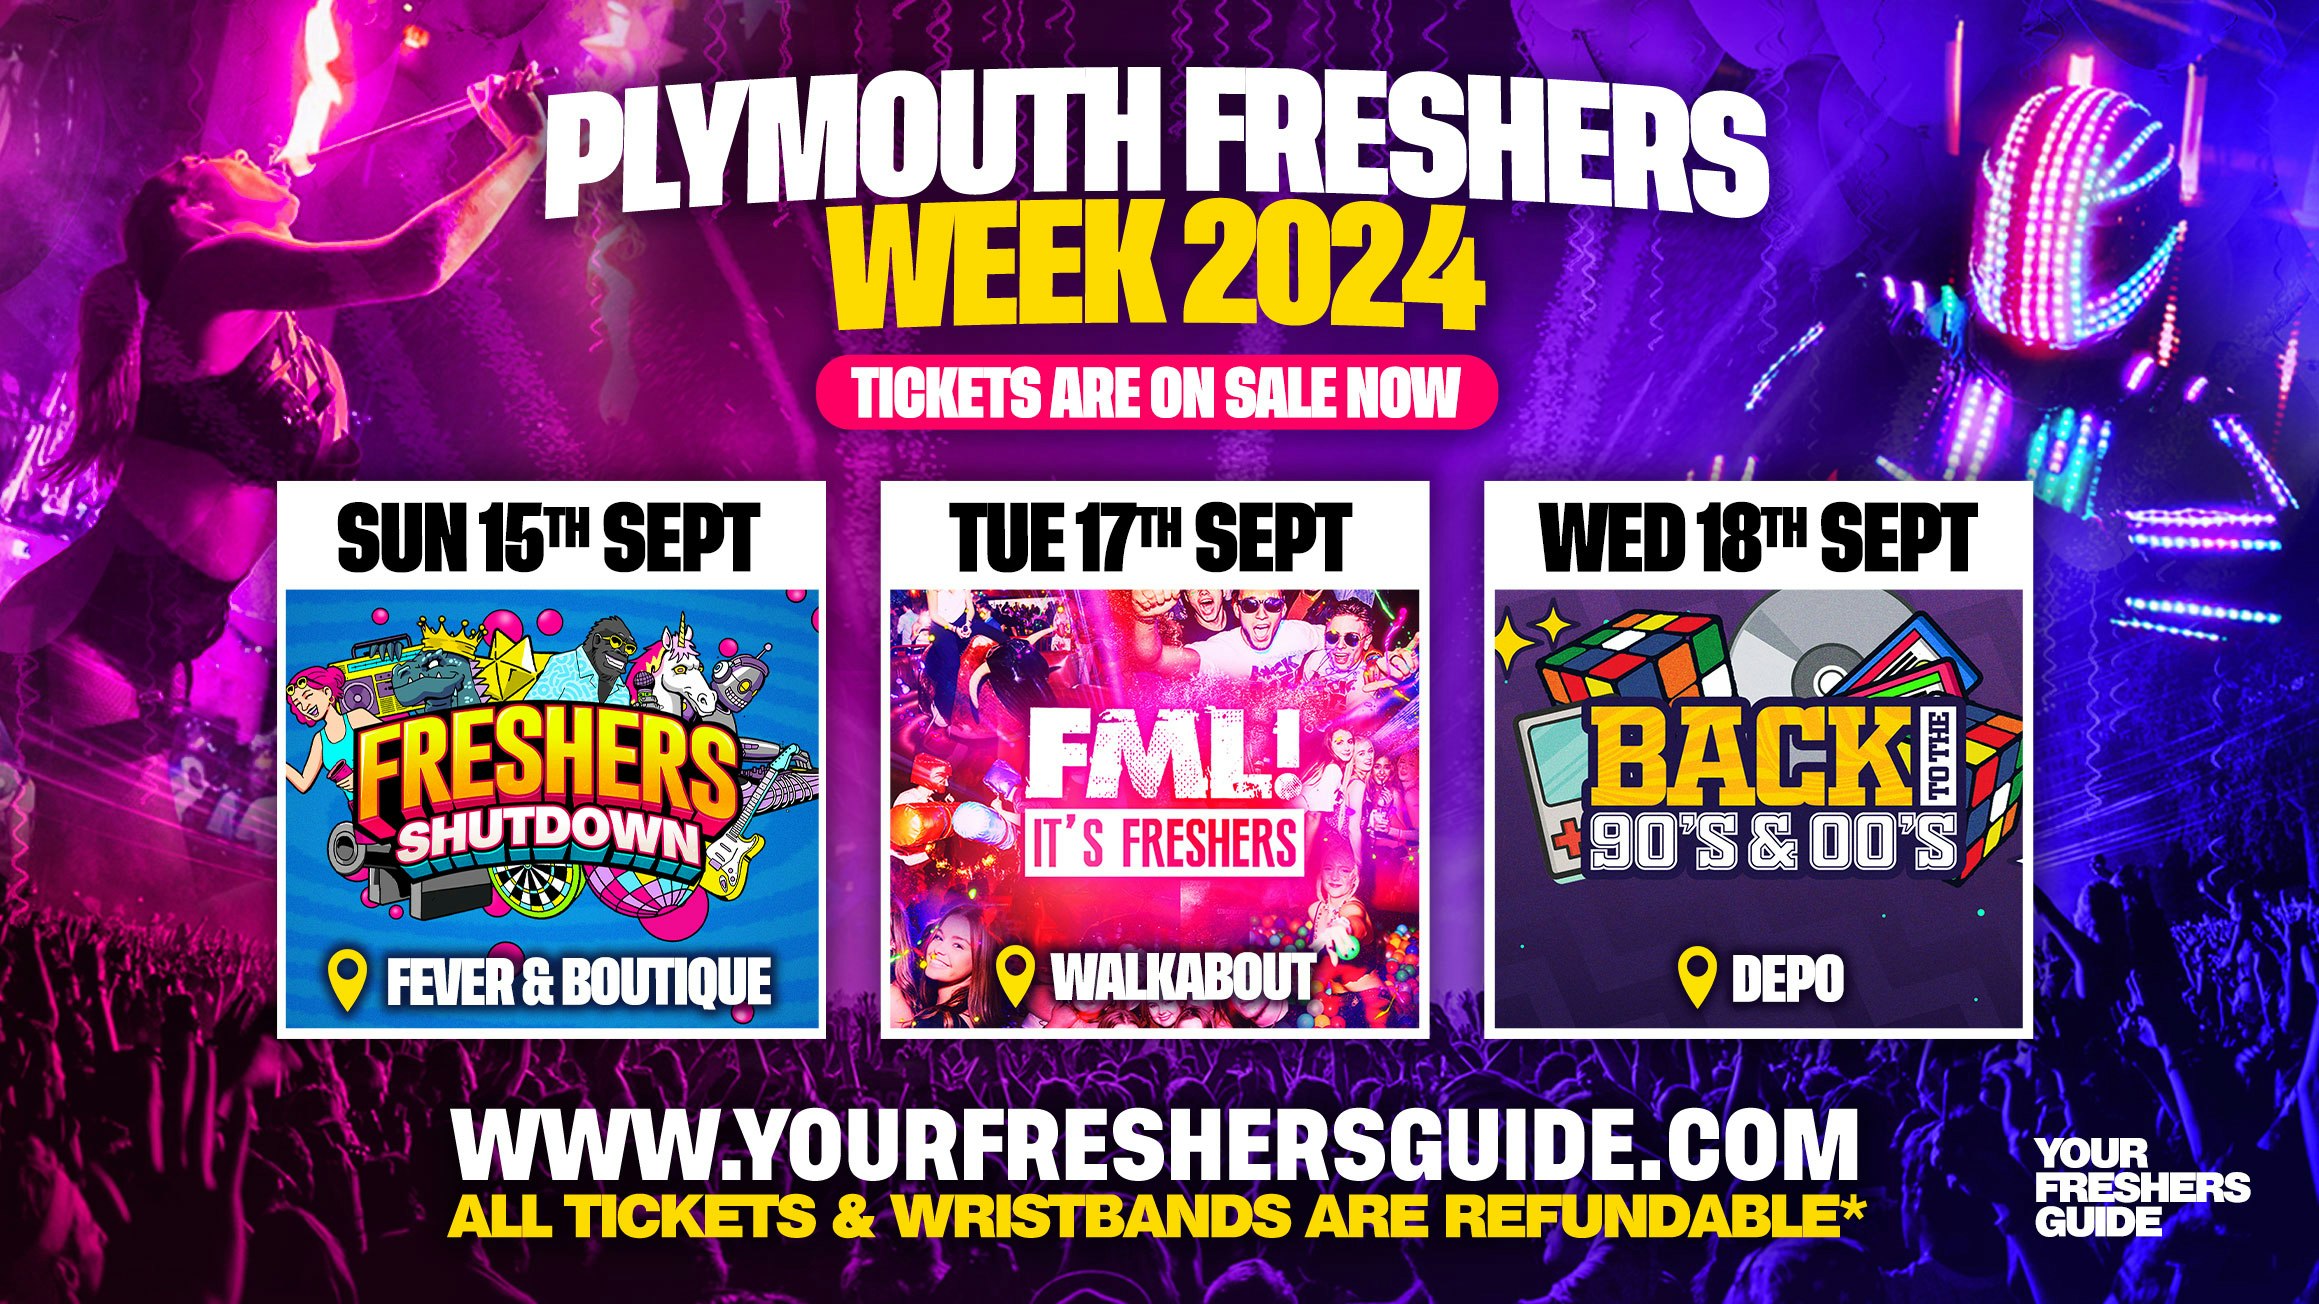 Plymouth Freshers Week Wristband 2024 – The Biggest Events of Plymouth Freshers 2024 🎉